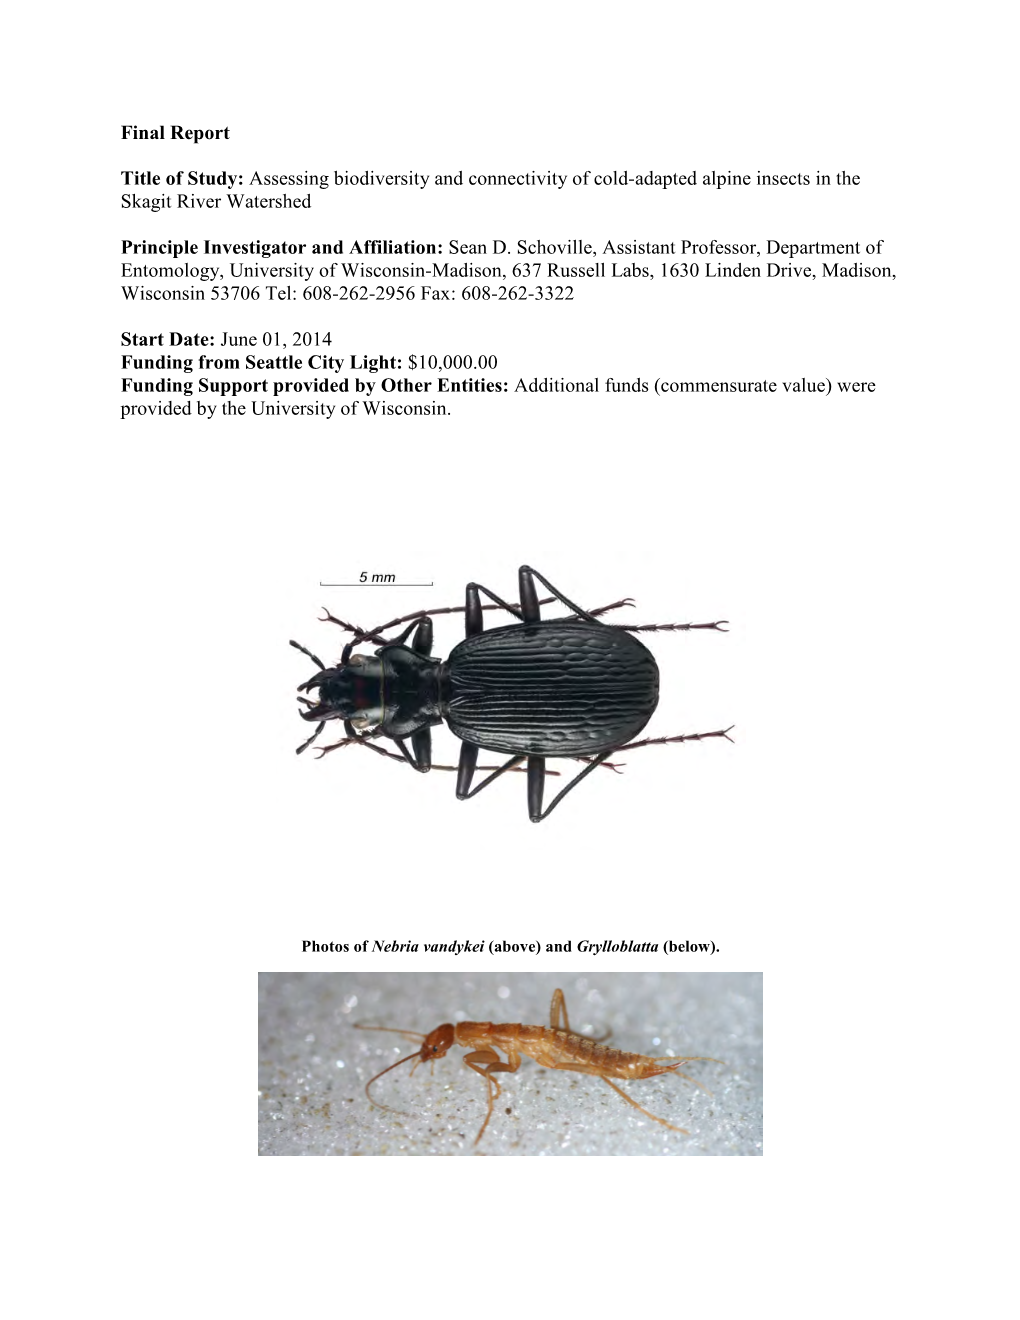 Assessing Biodiversity and Connectivity of Cold-Adapted Alpine Insects in the Skagit River Watershed